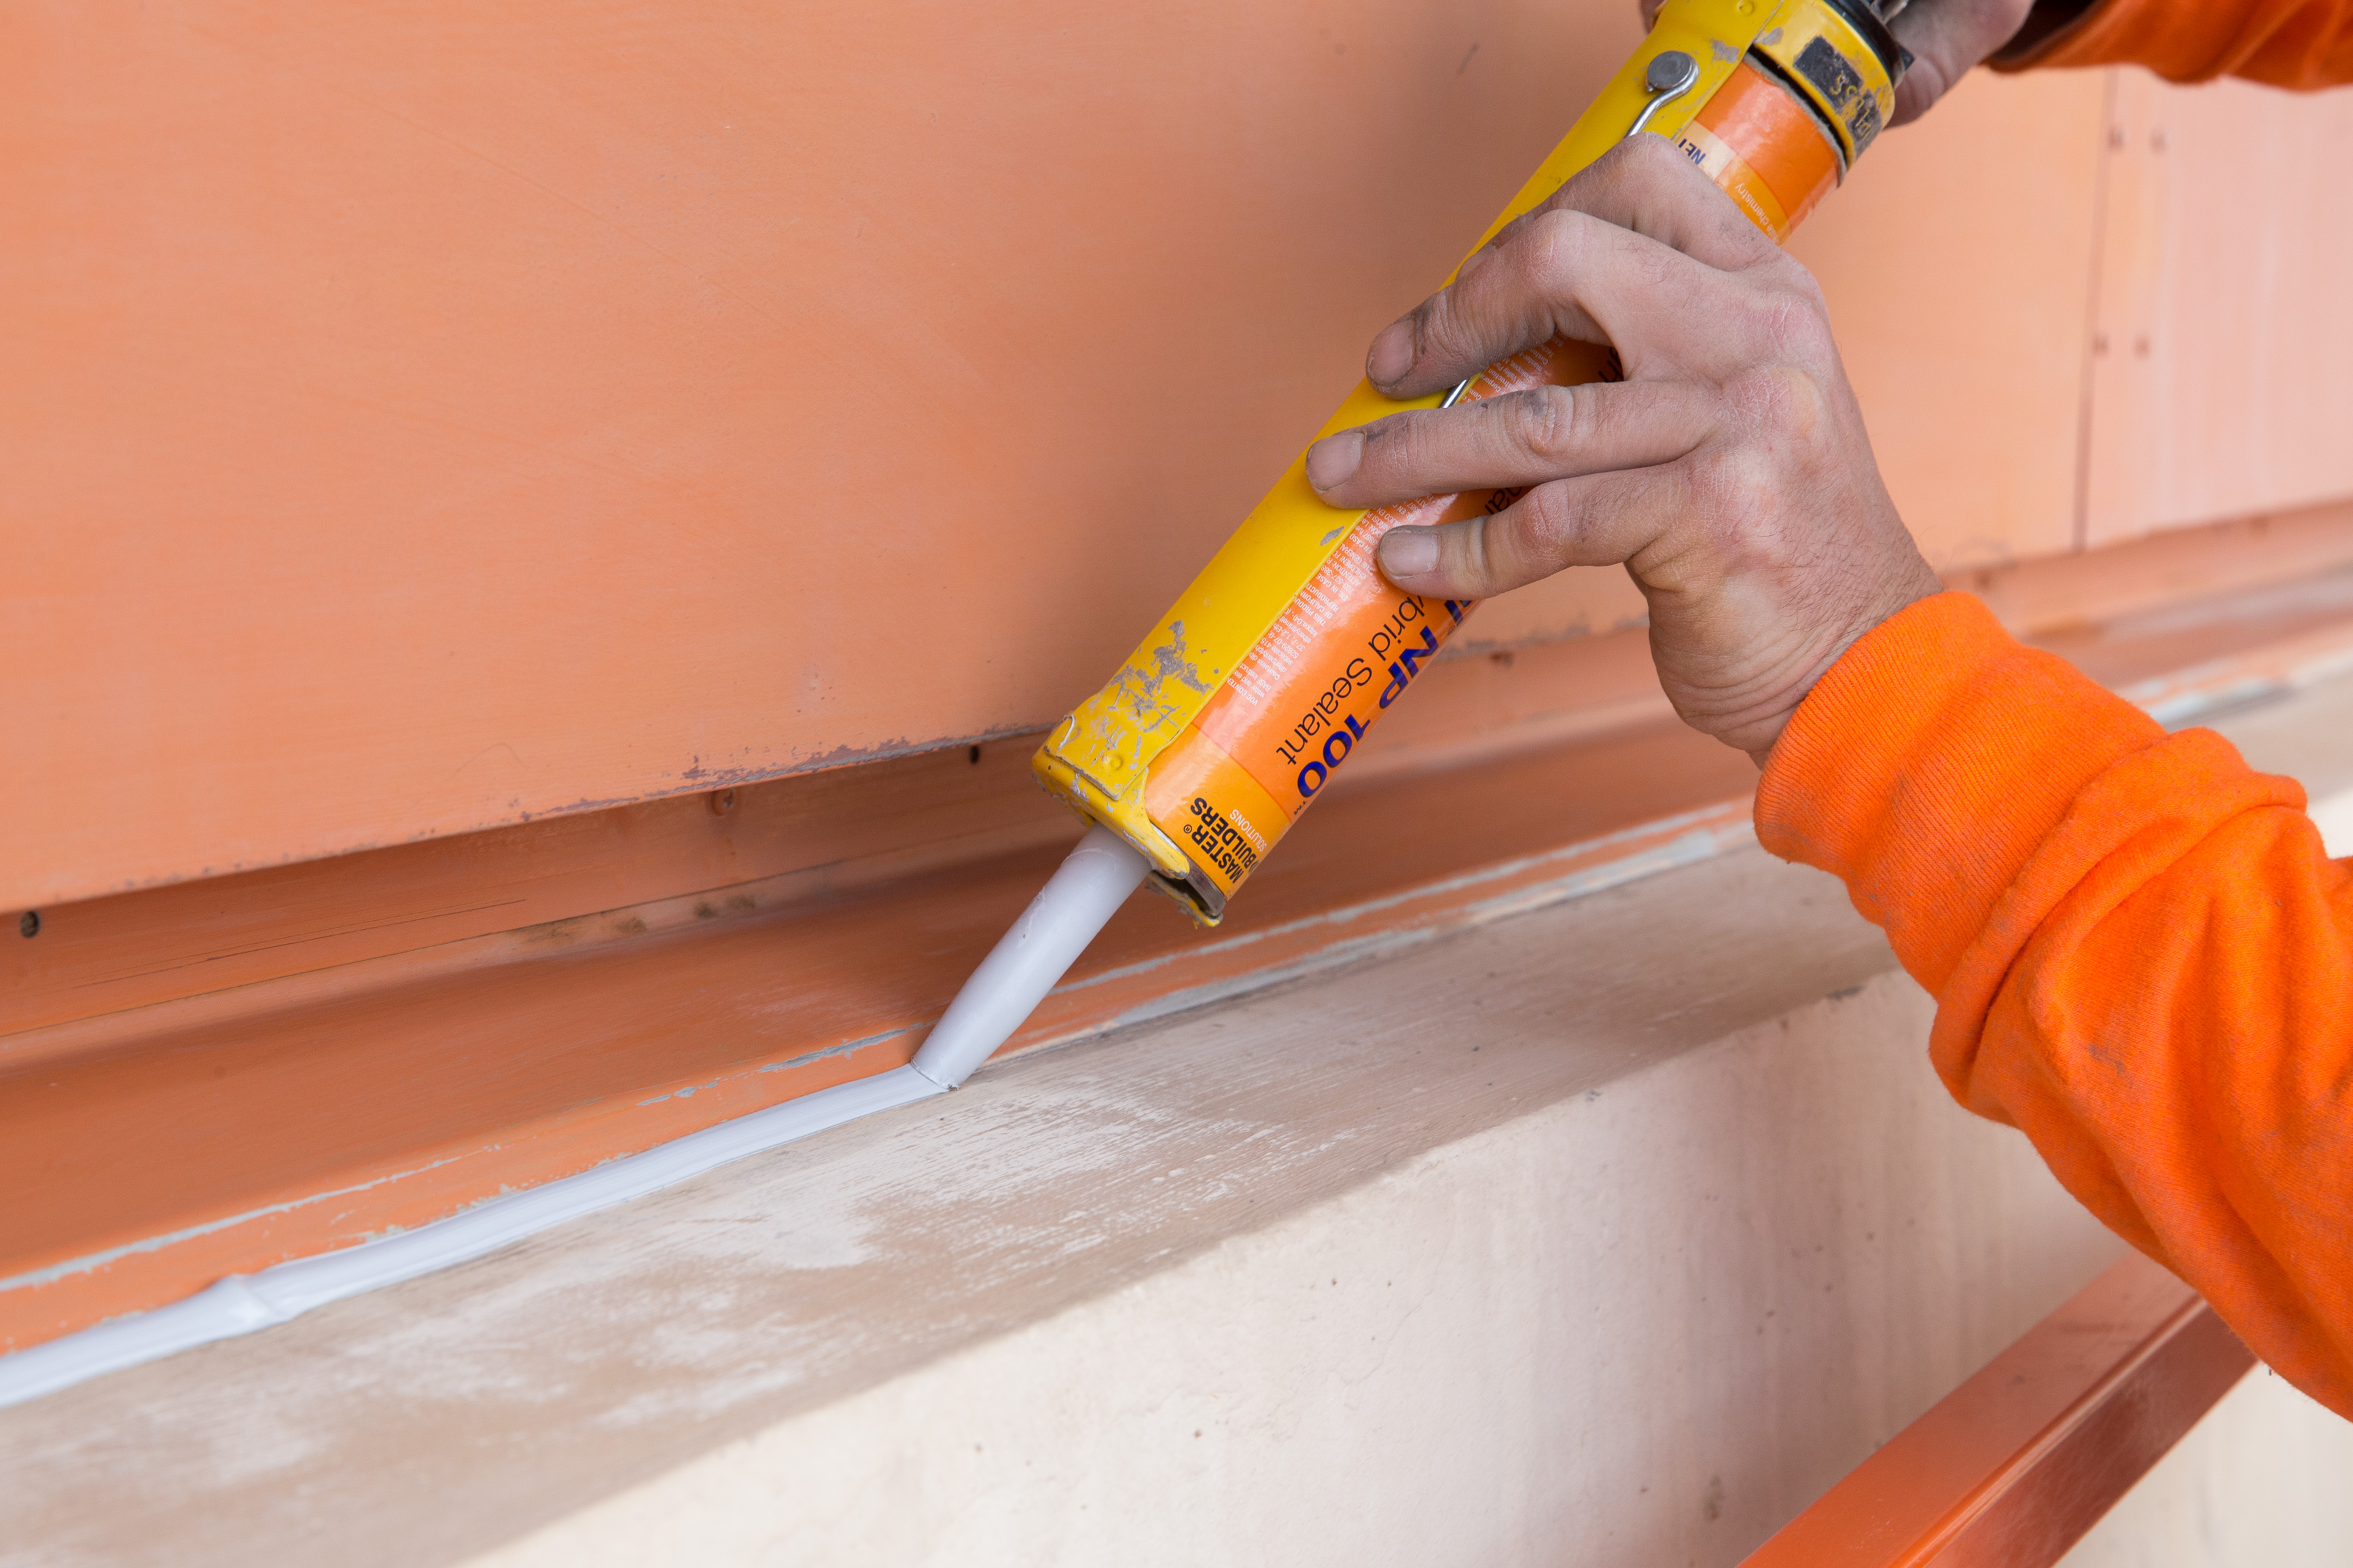 Construction sealant being used to fill an exterior joint.